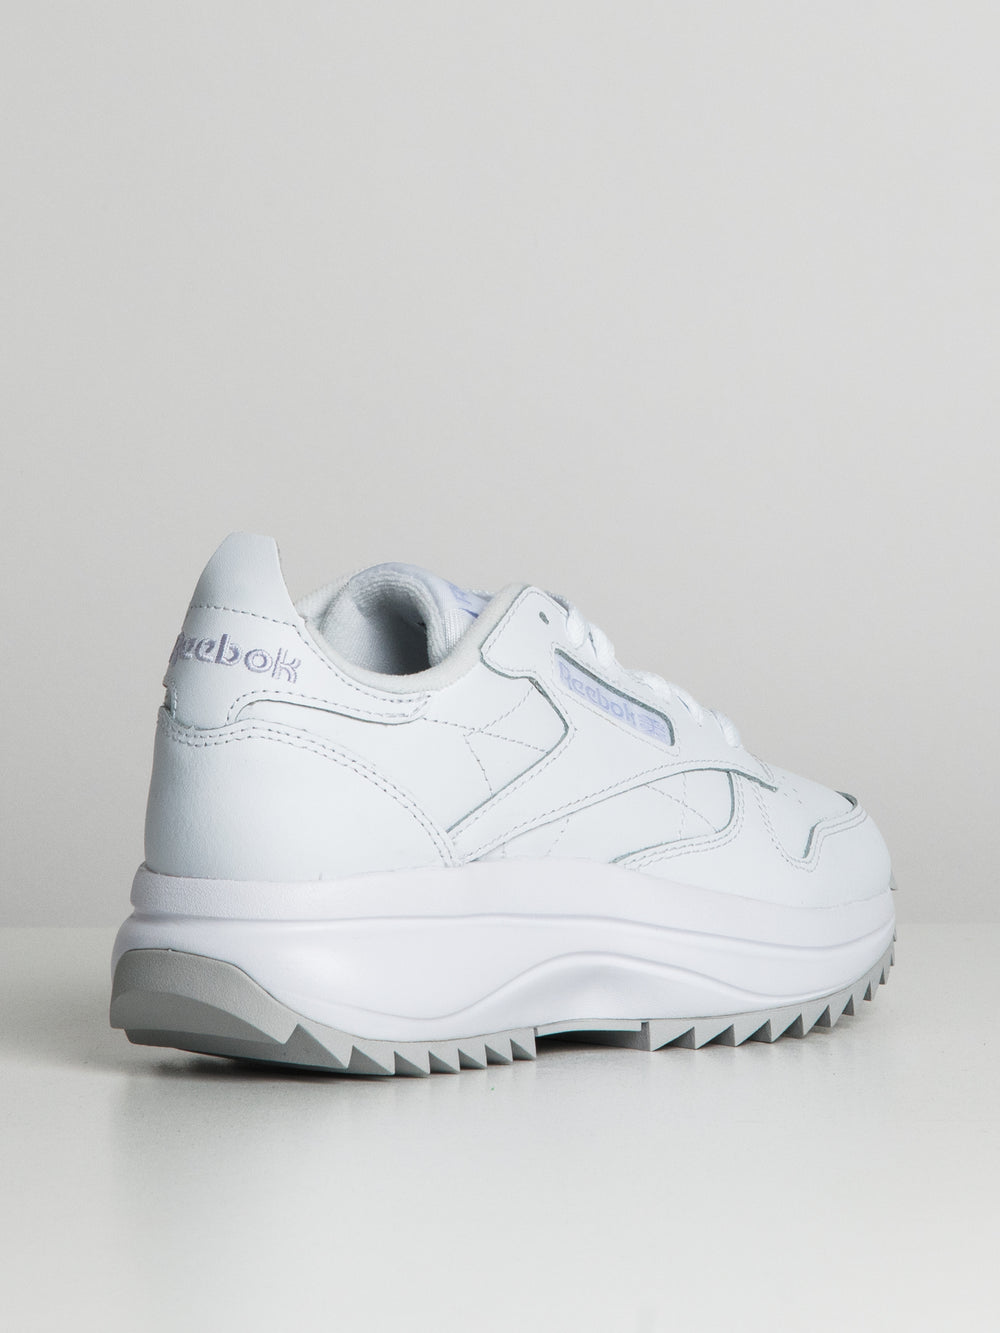 WOMENS REEBOK CLASSIC LEATHER SP EXTRA - CLEARANCE